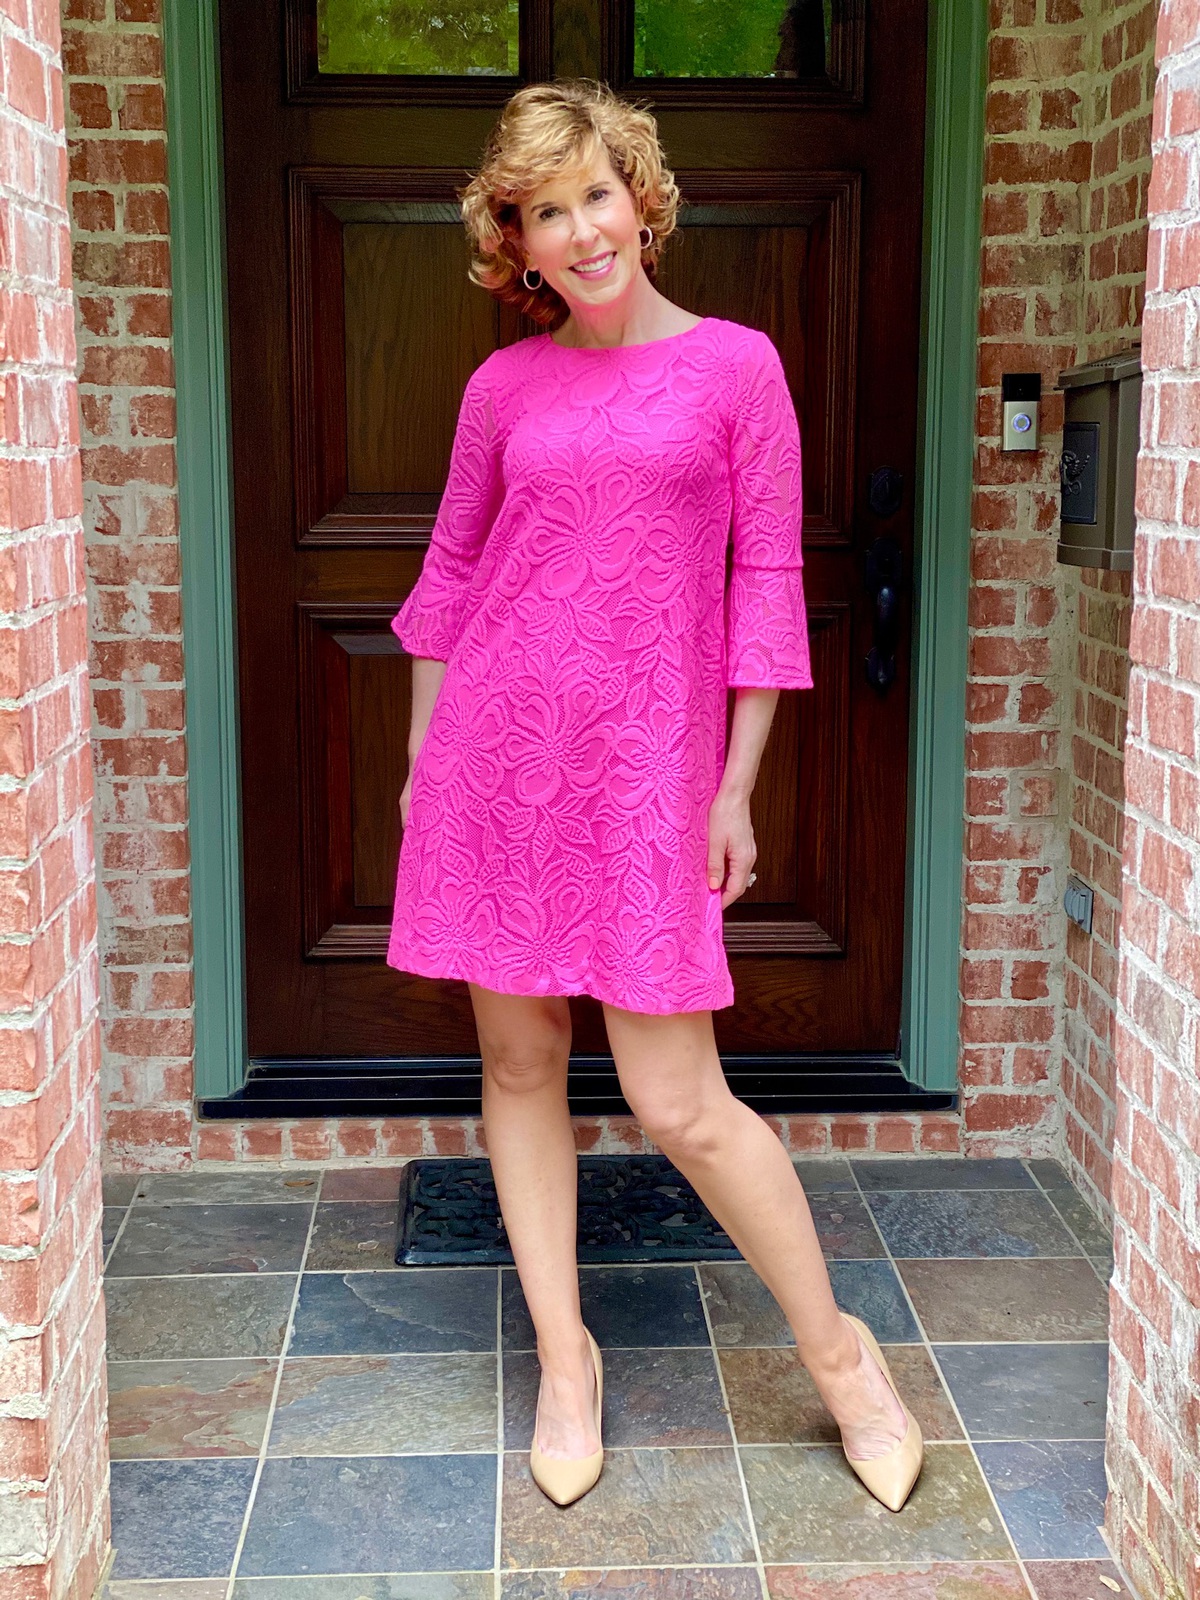 woman wearing neon pink dress standing on front porch